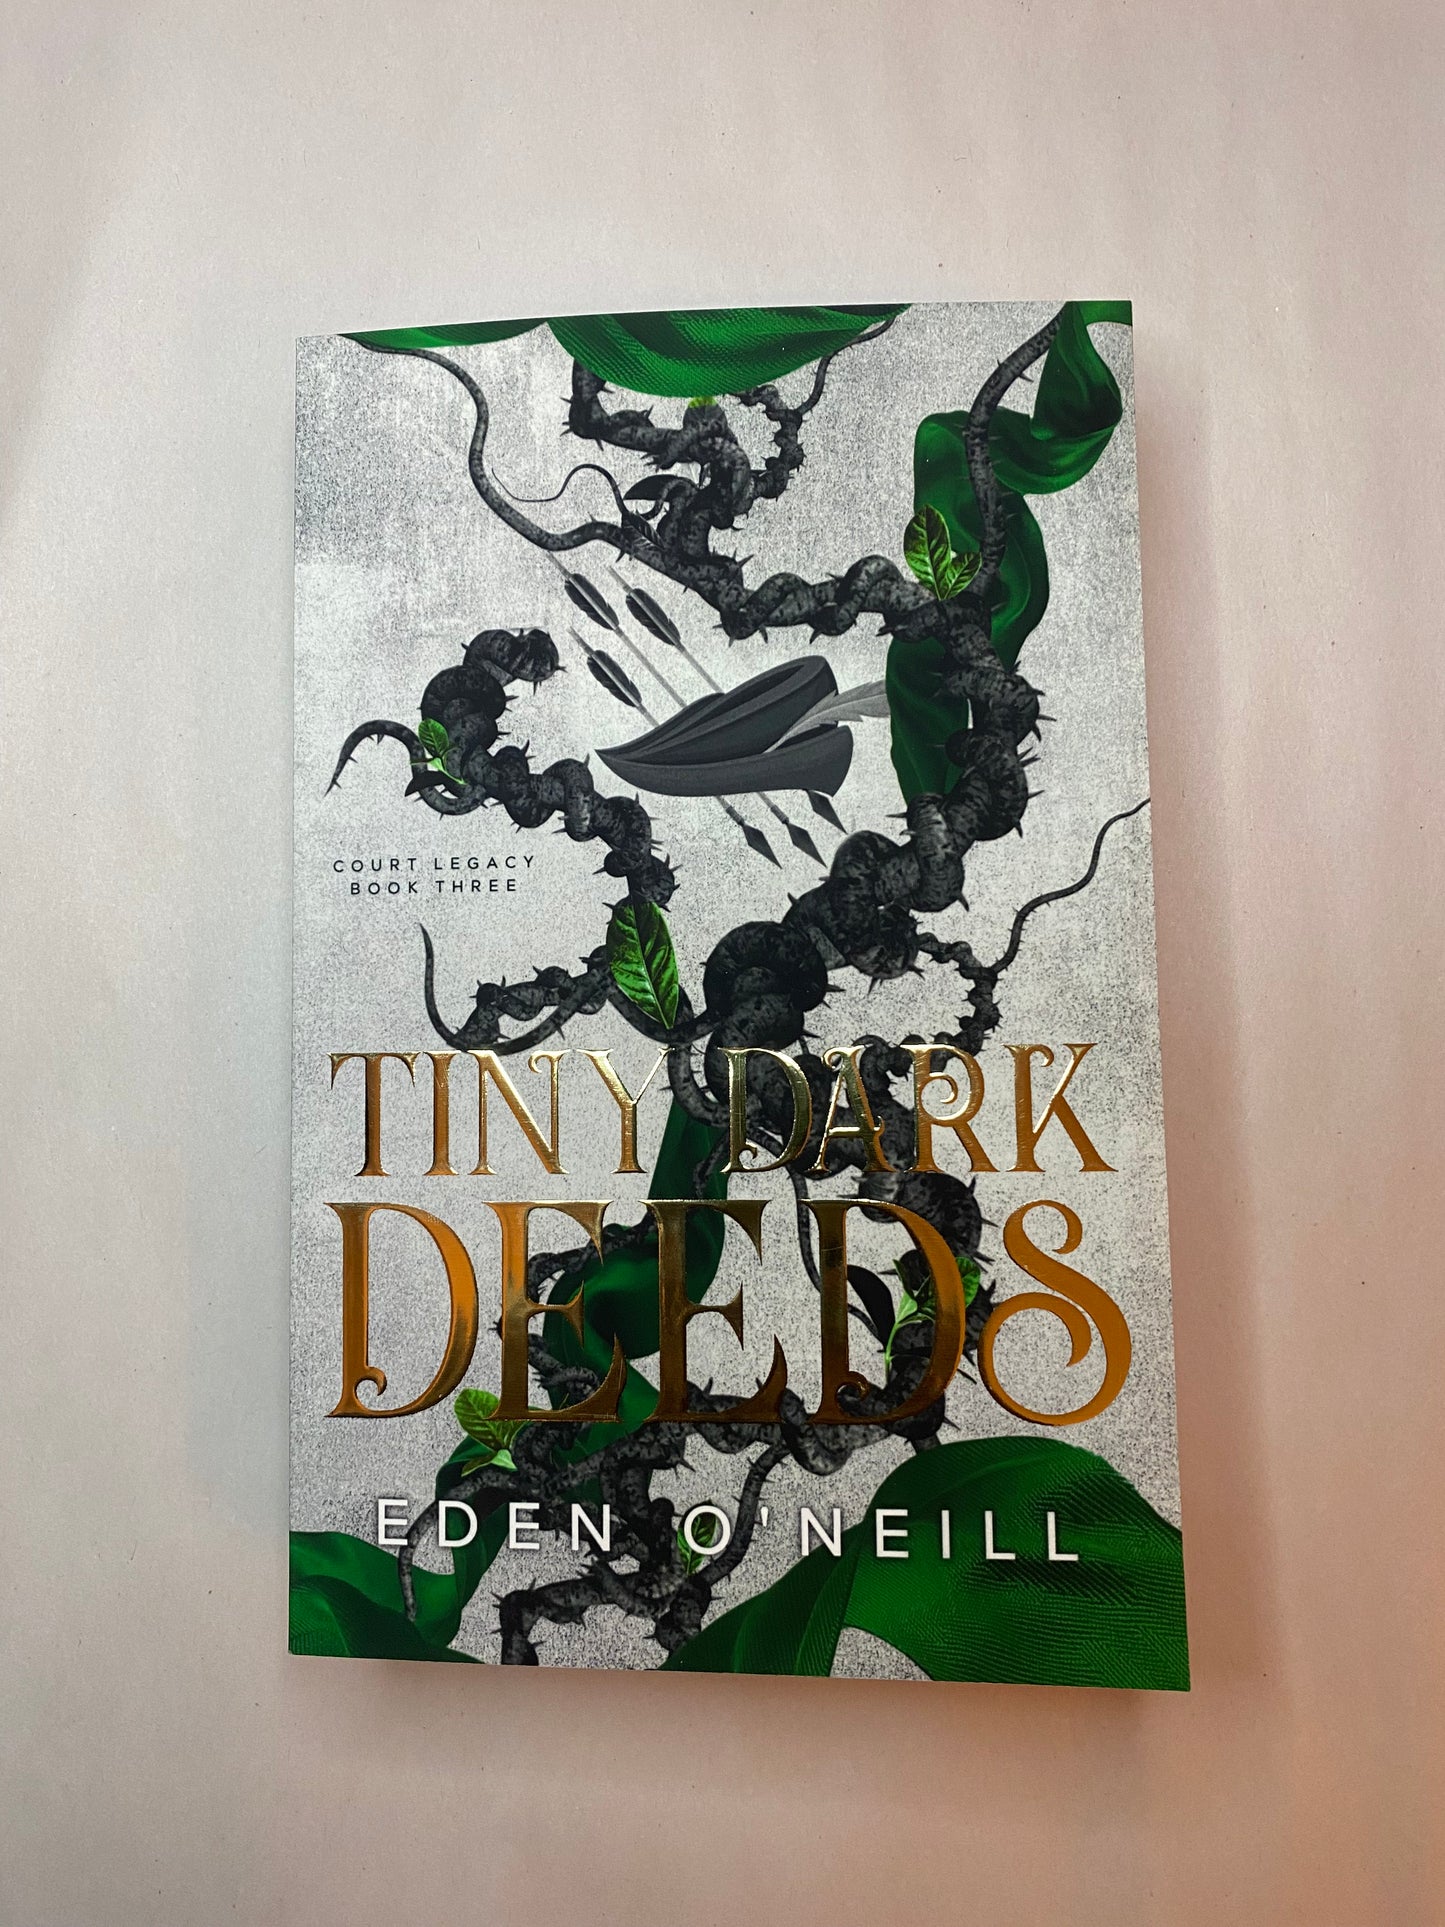 *Special Edition* Tiny Dark Deeds - Hand Signed Soft or Hardcover